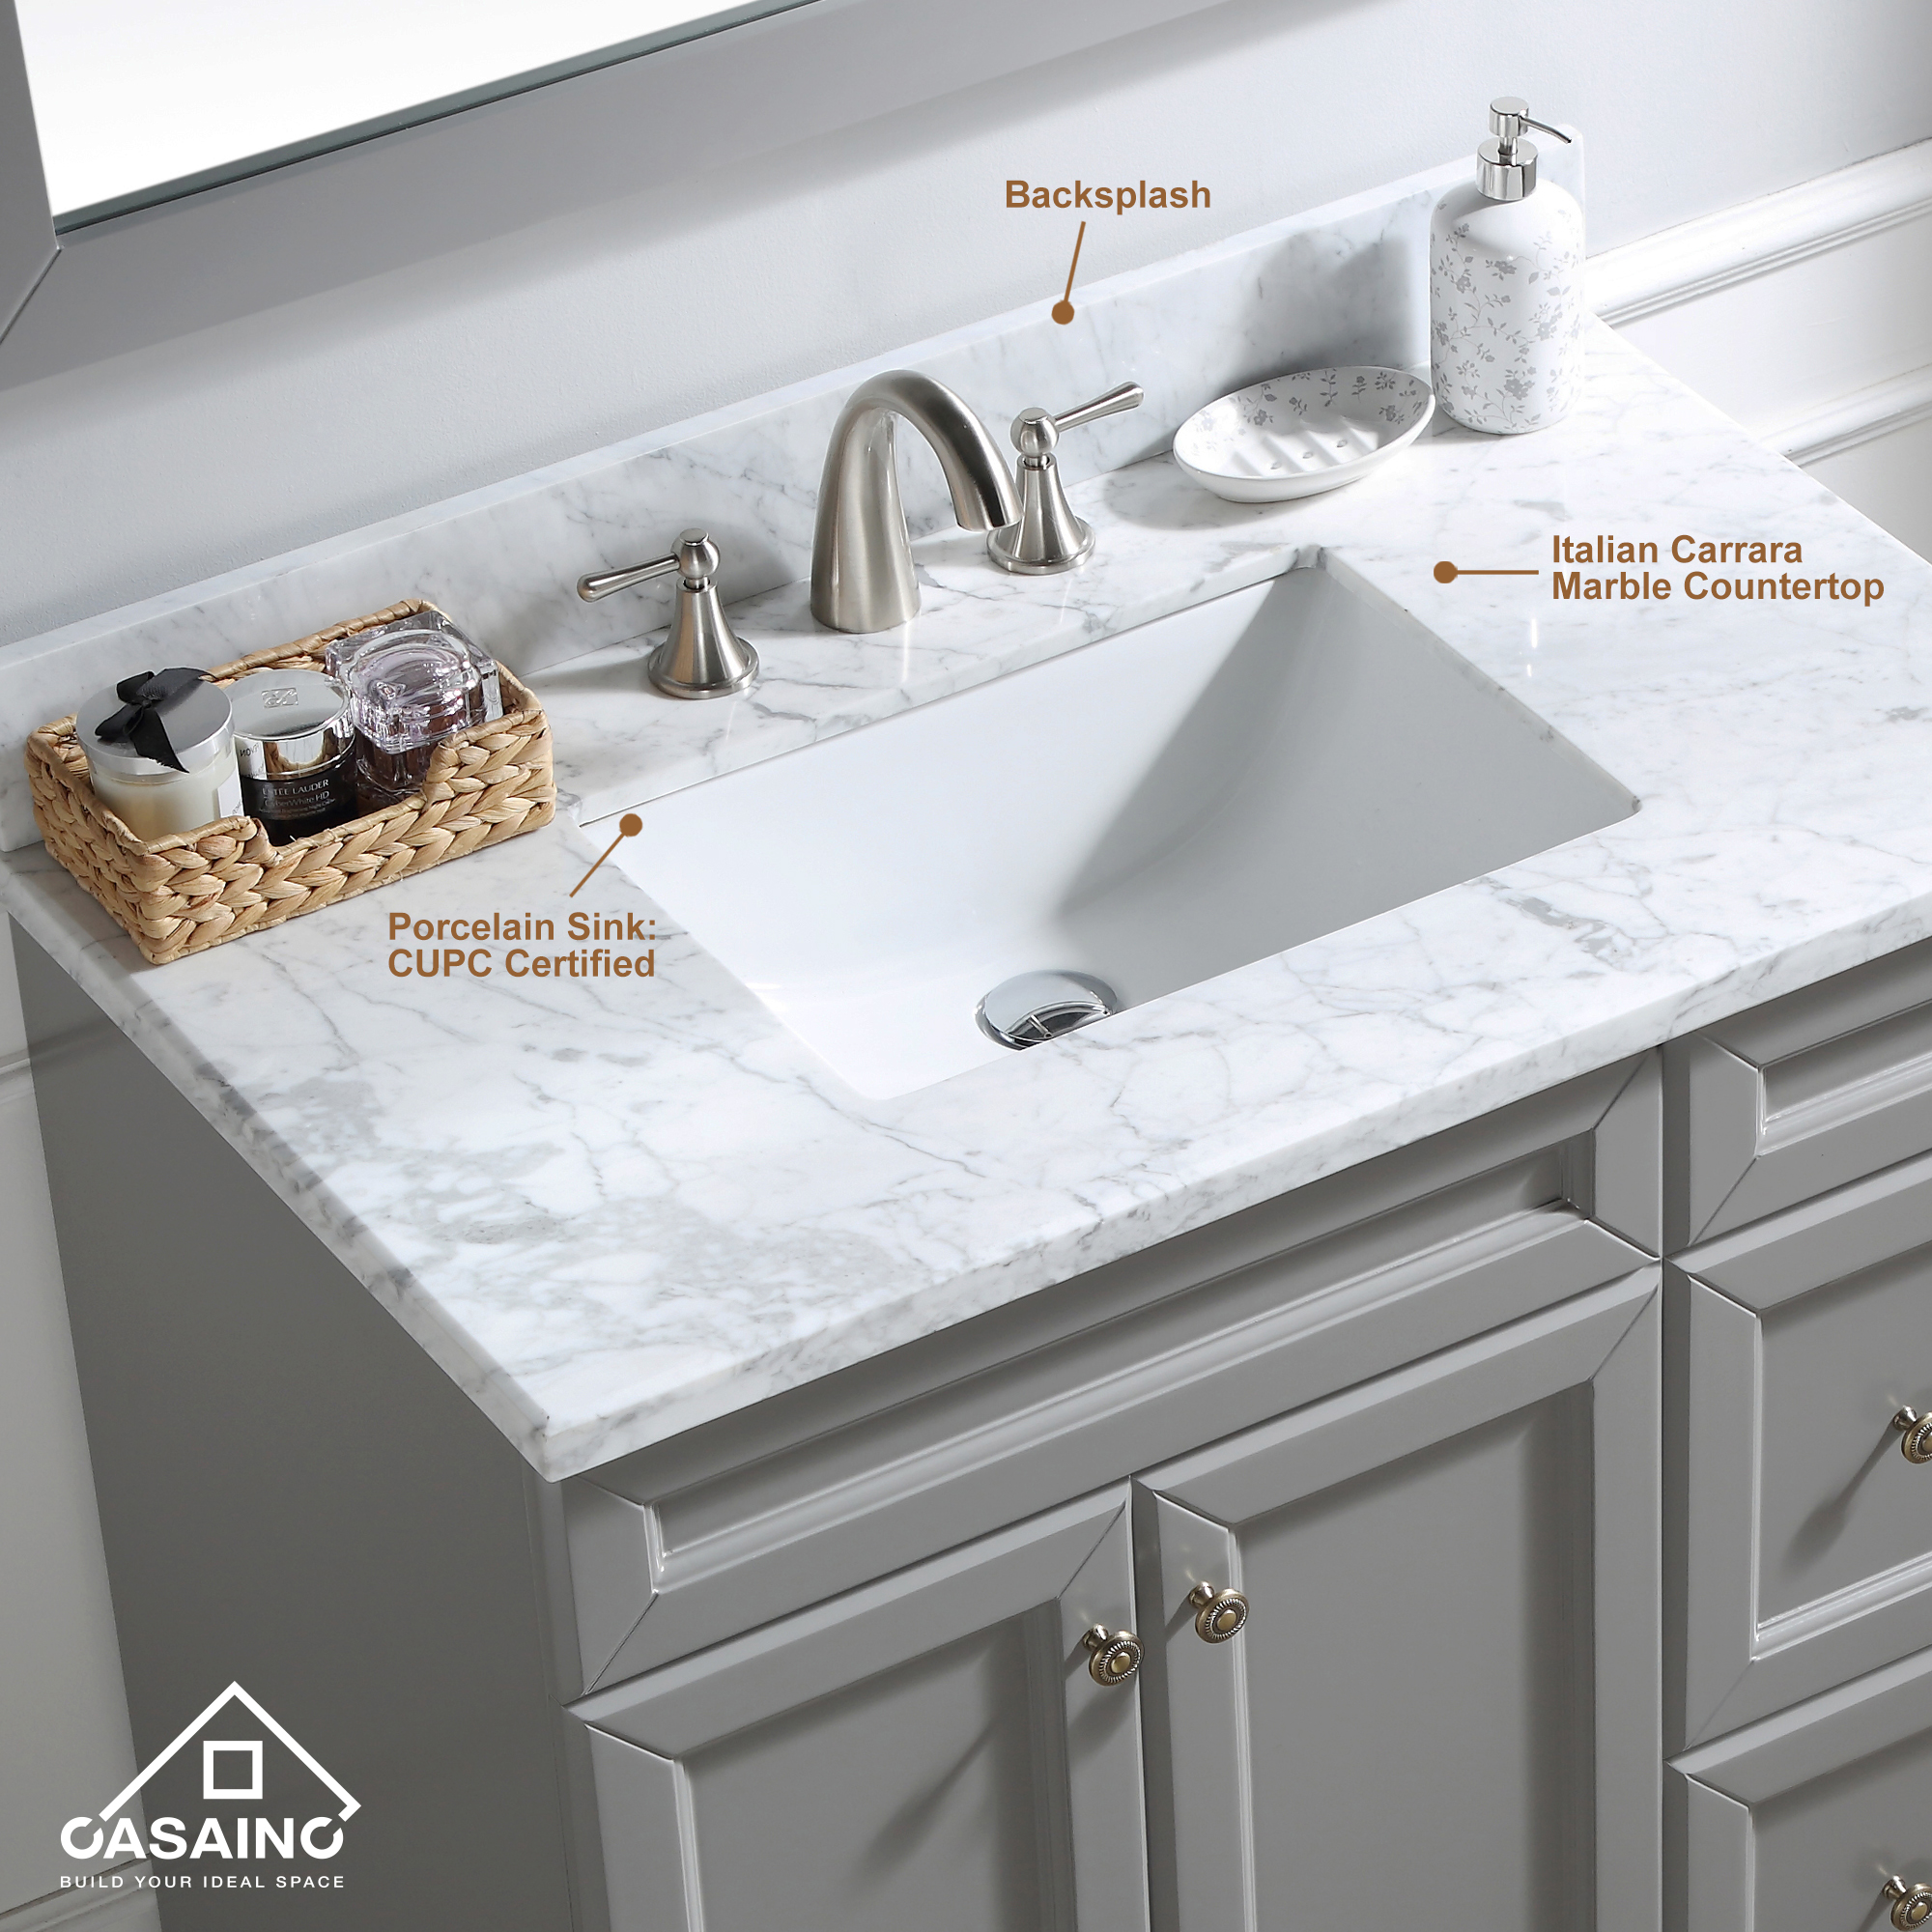 Dropship Bathroom Vanity Cabinet Set 60 Inches Double Sink, Bathroom Storage  Carrara White Marble Countertop With Back Splash to Sell Online at a Lower  Price